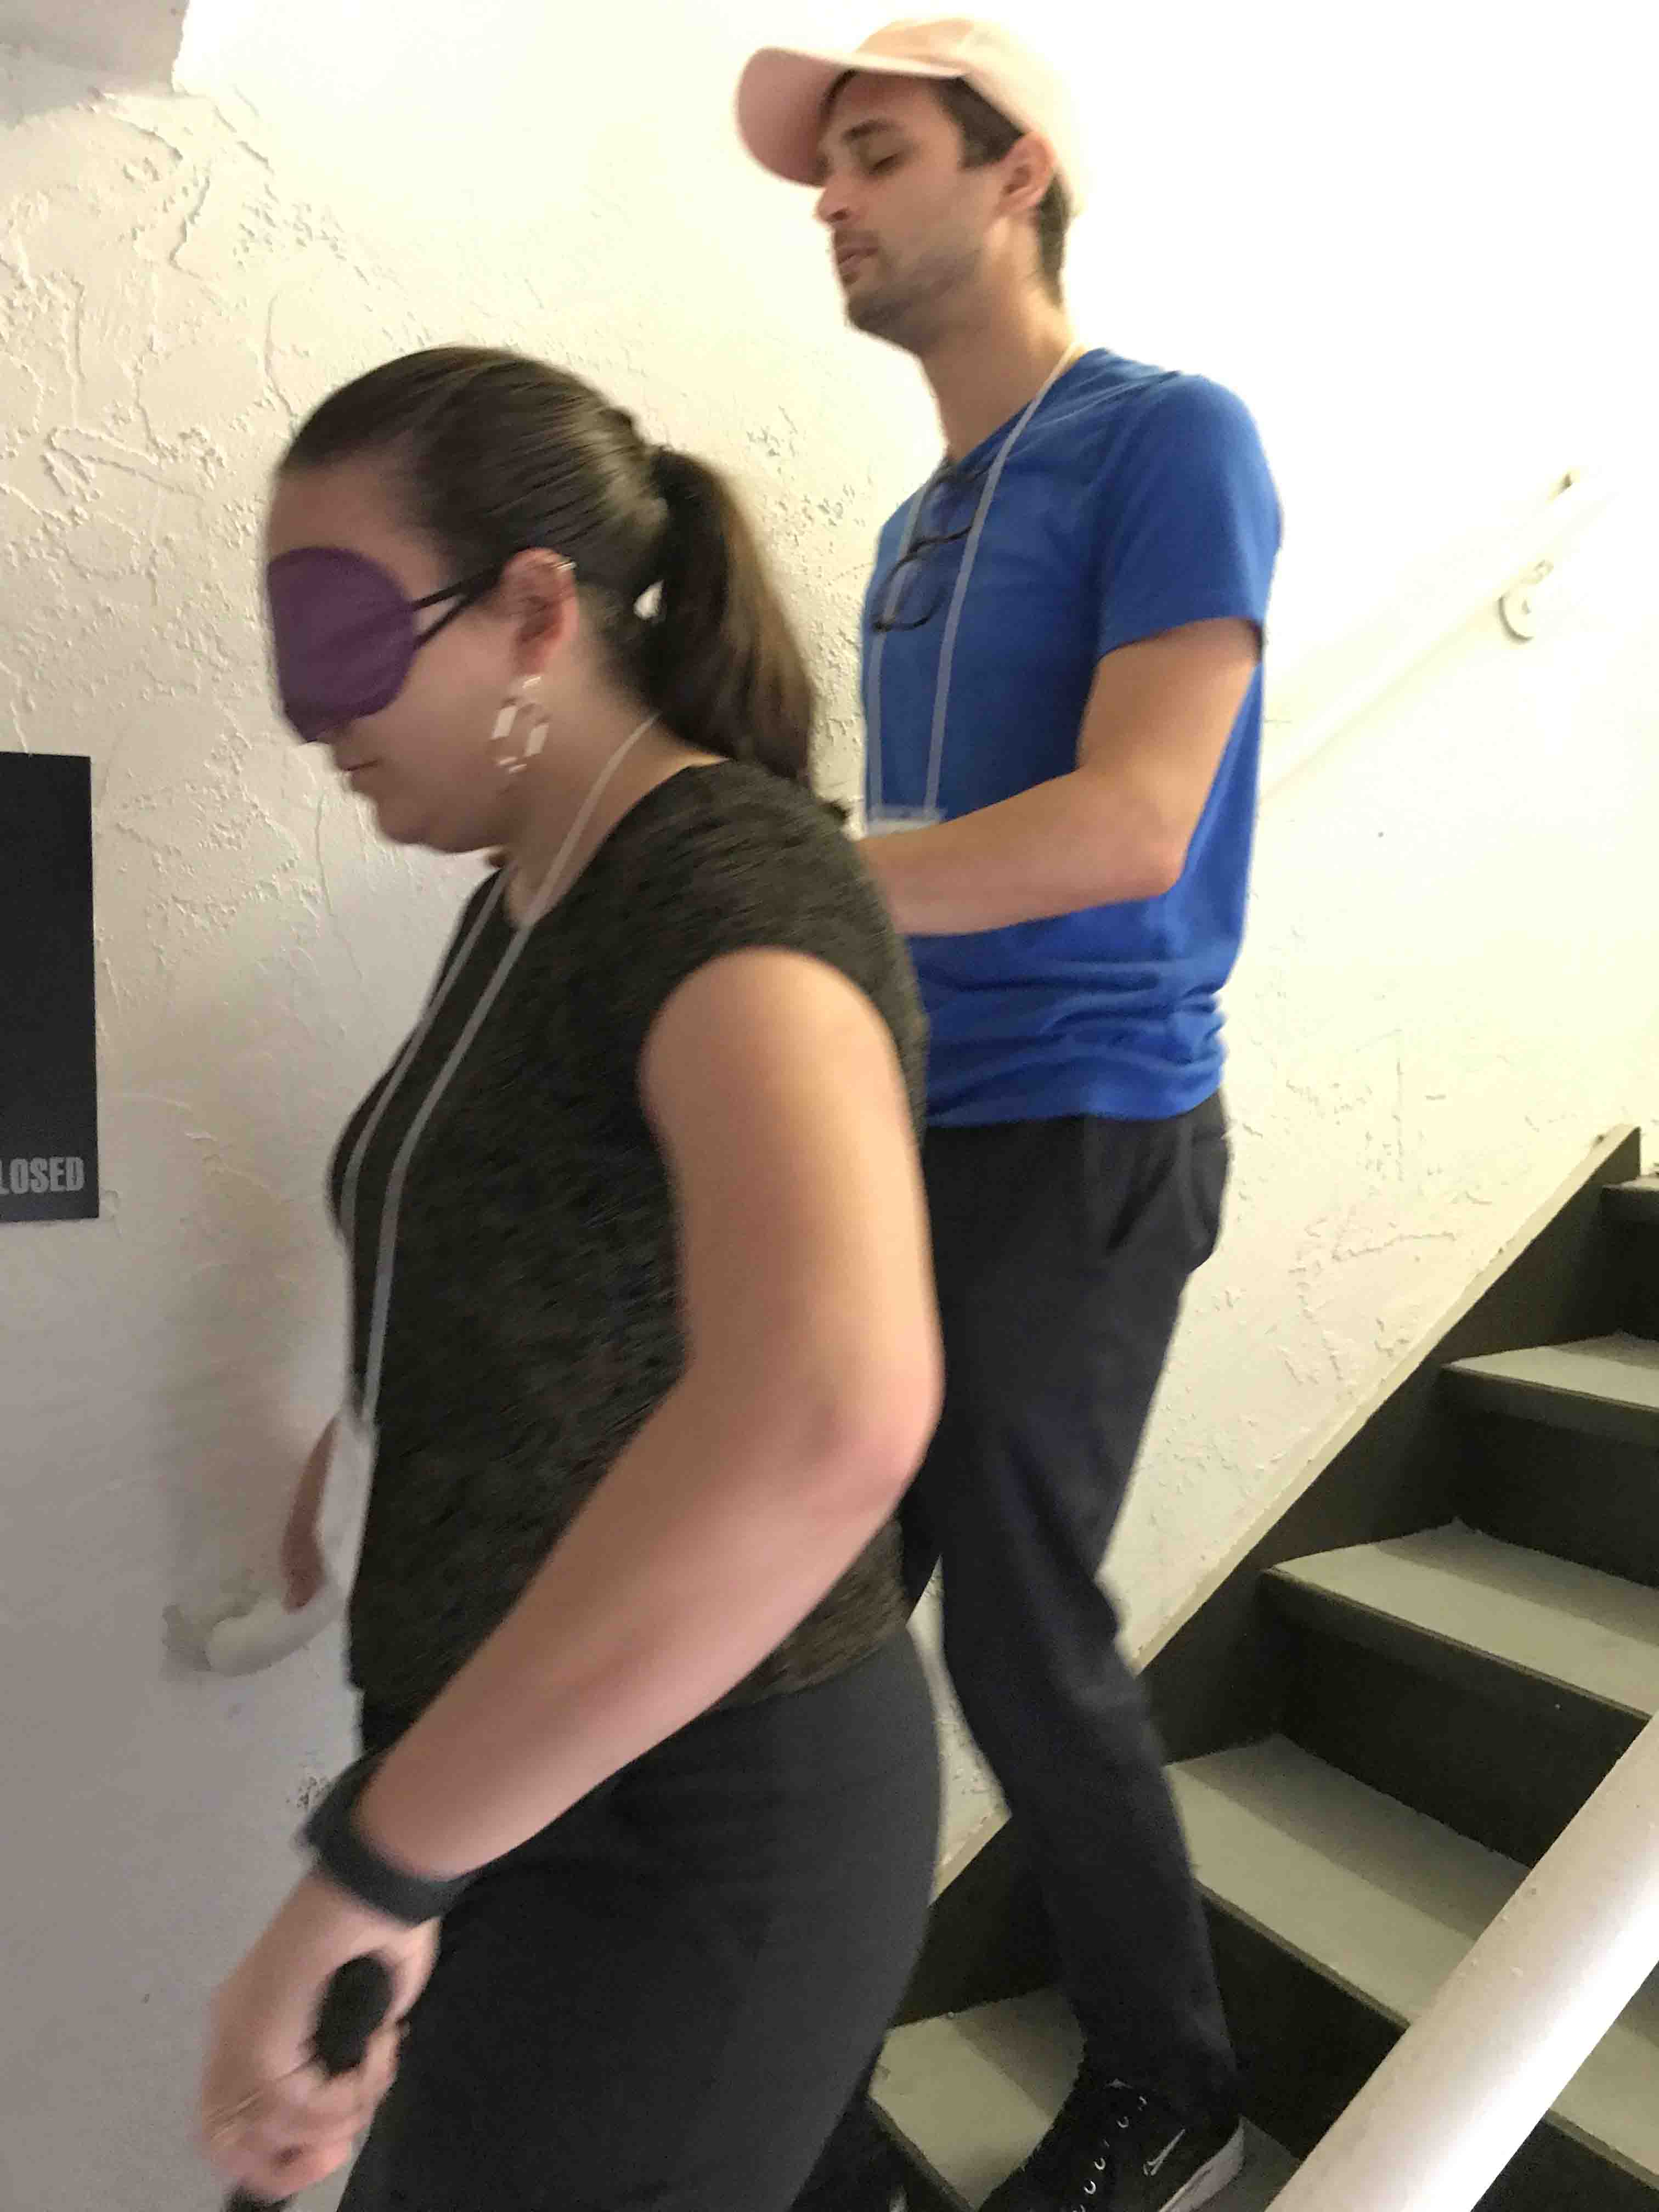 2 pictures show a woman wearing a blindfold and holdng a cane in her left hand and the railing in her right hand as she descends a stairway.  She is guiding a man on her right, he has his eyes closed and is holding the guide's right arm with his left hand, and the railing with his right hand as they descend.